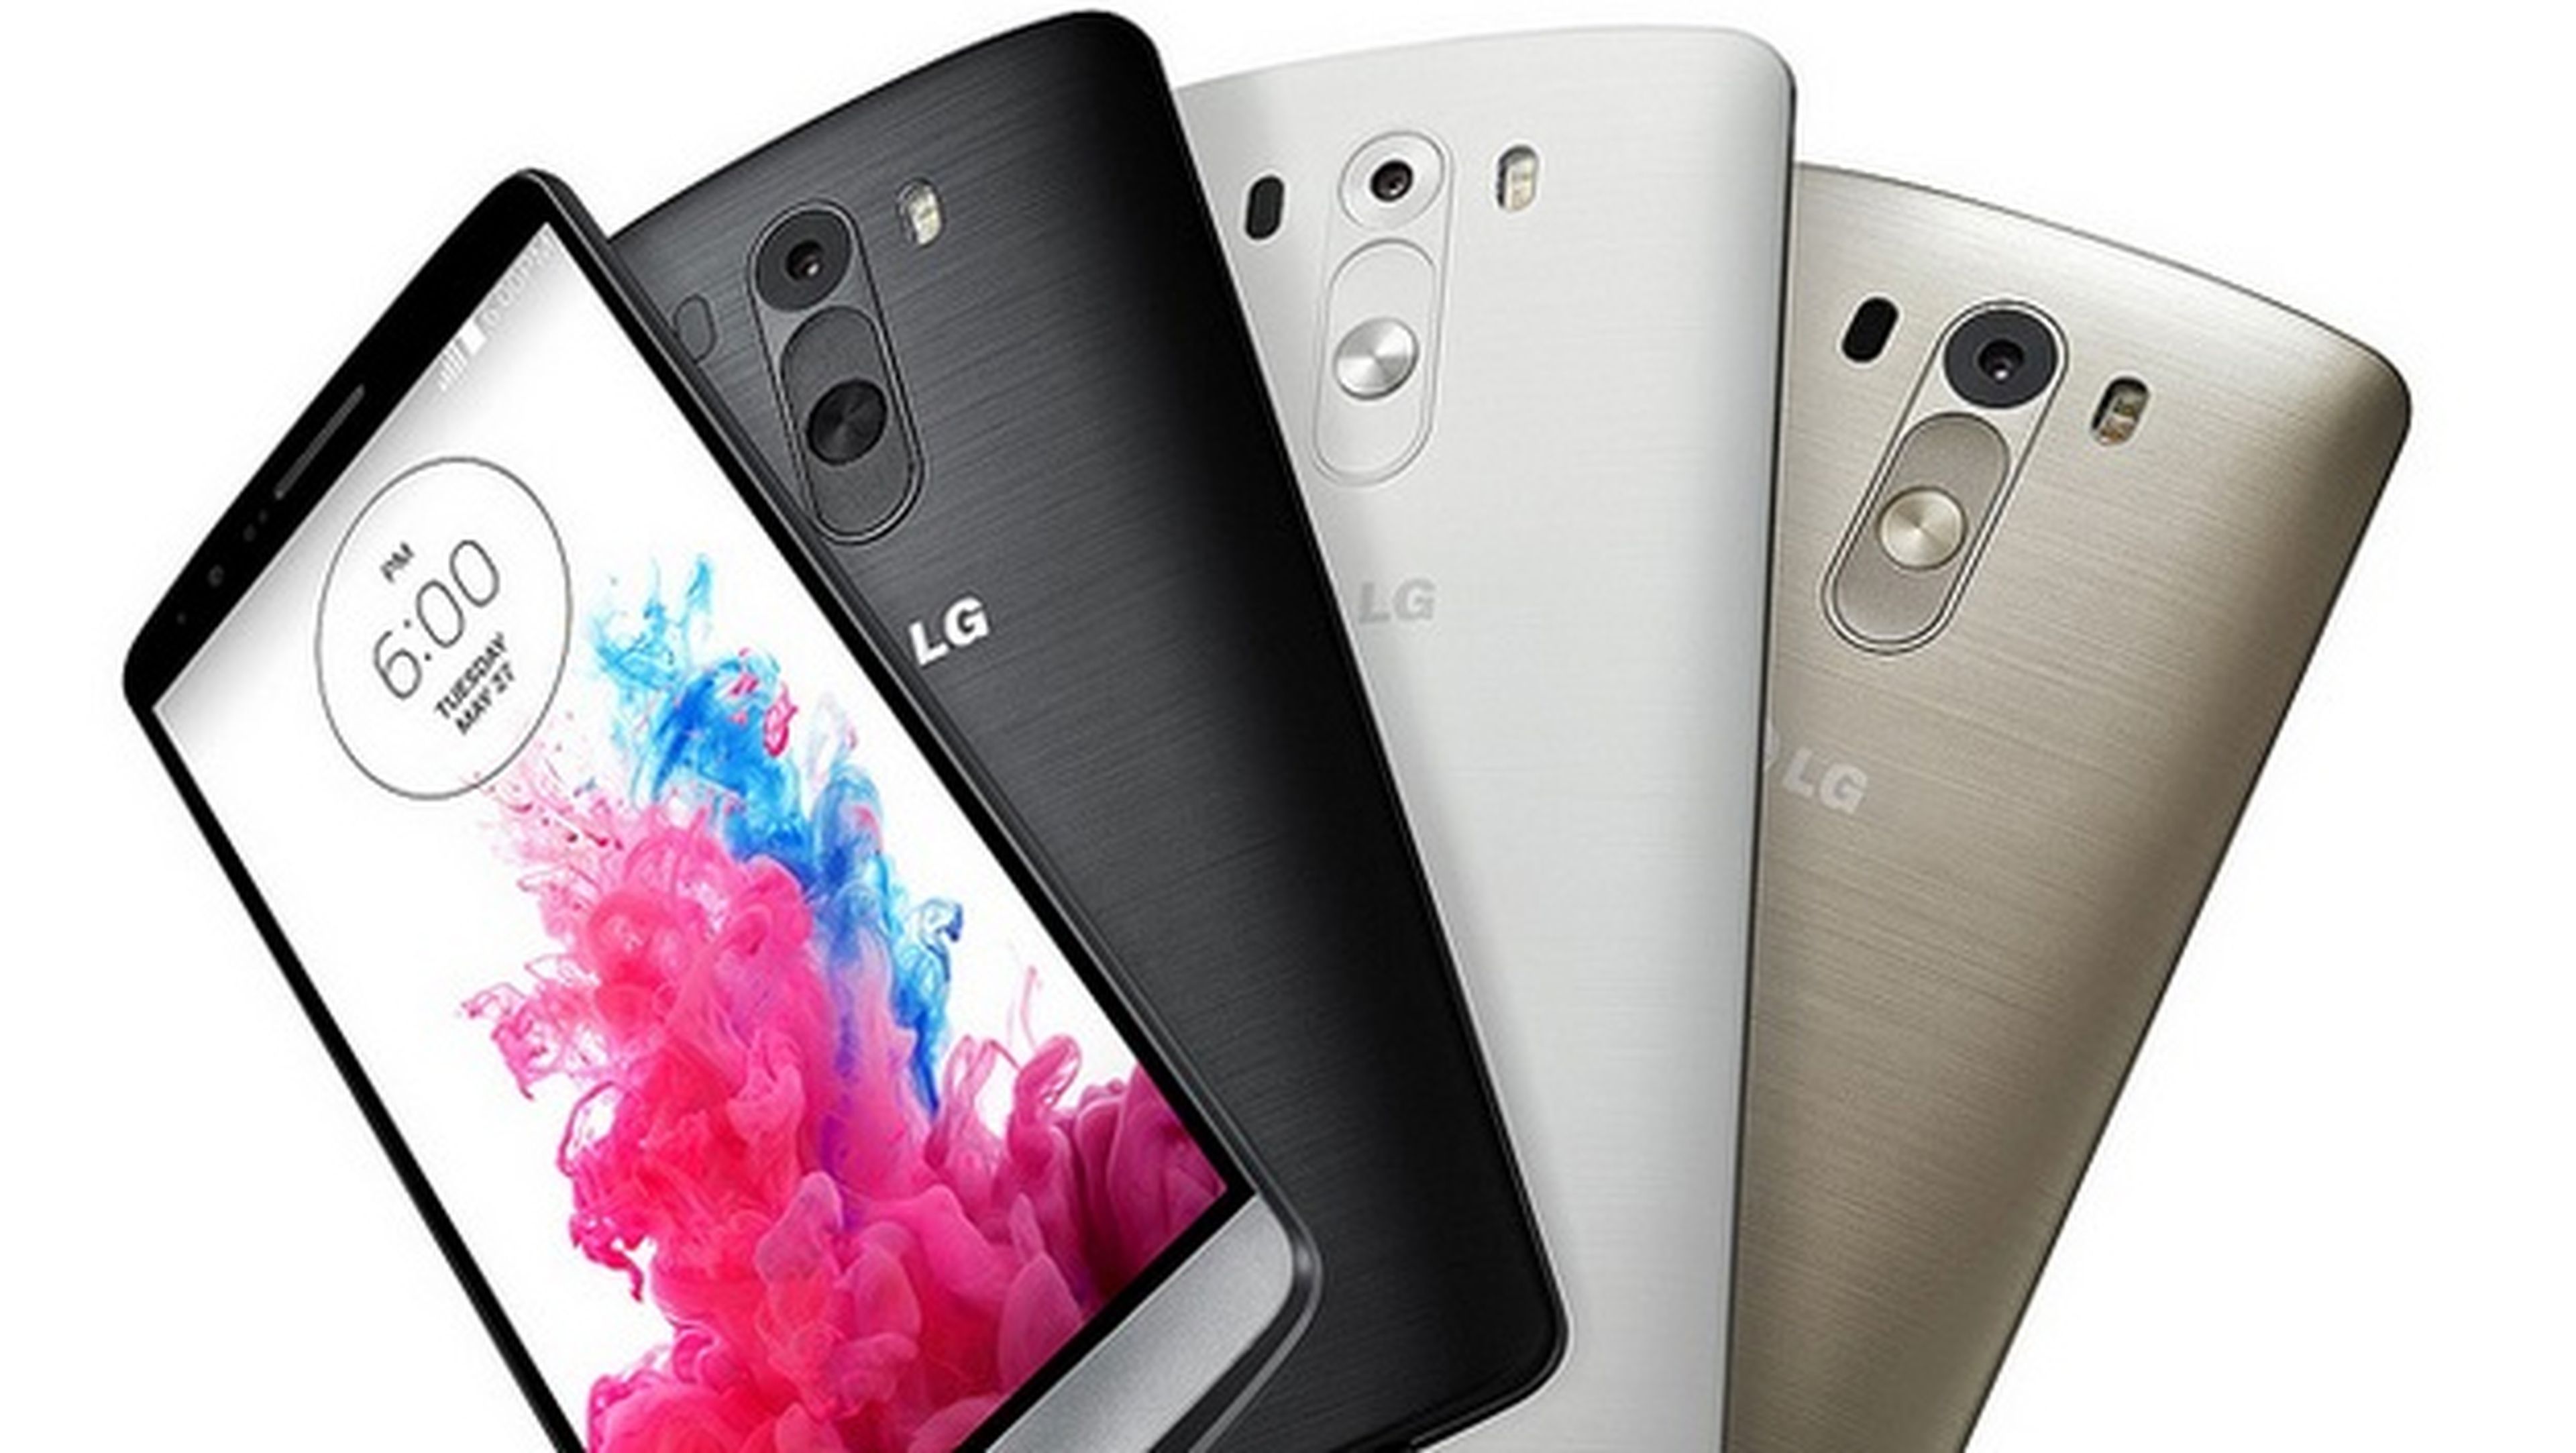 lg g3 android 5.0